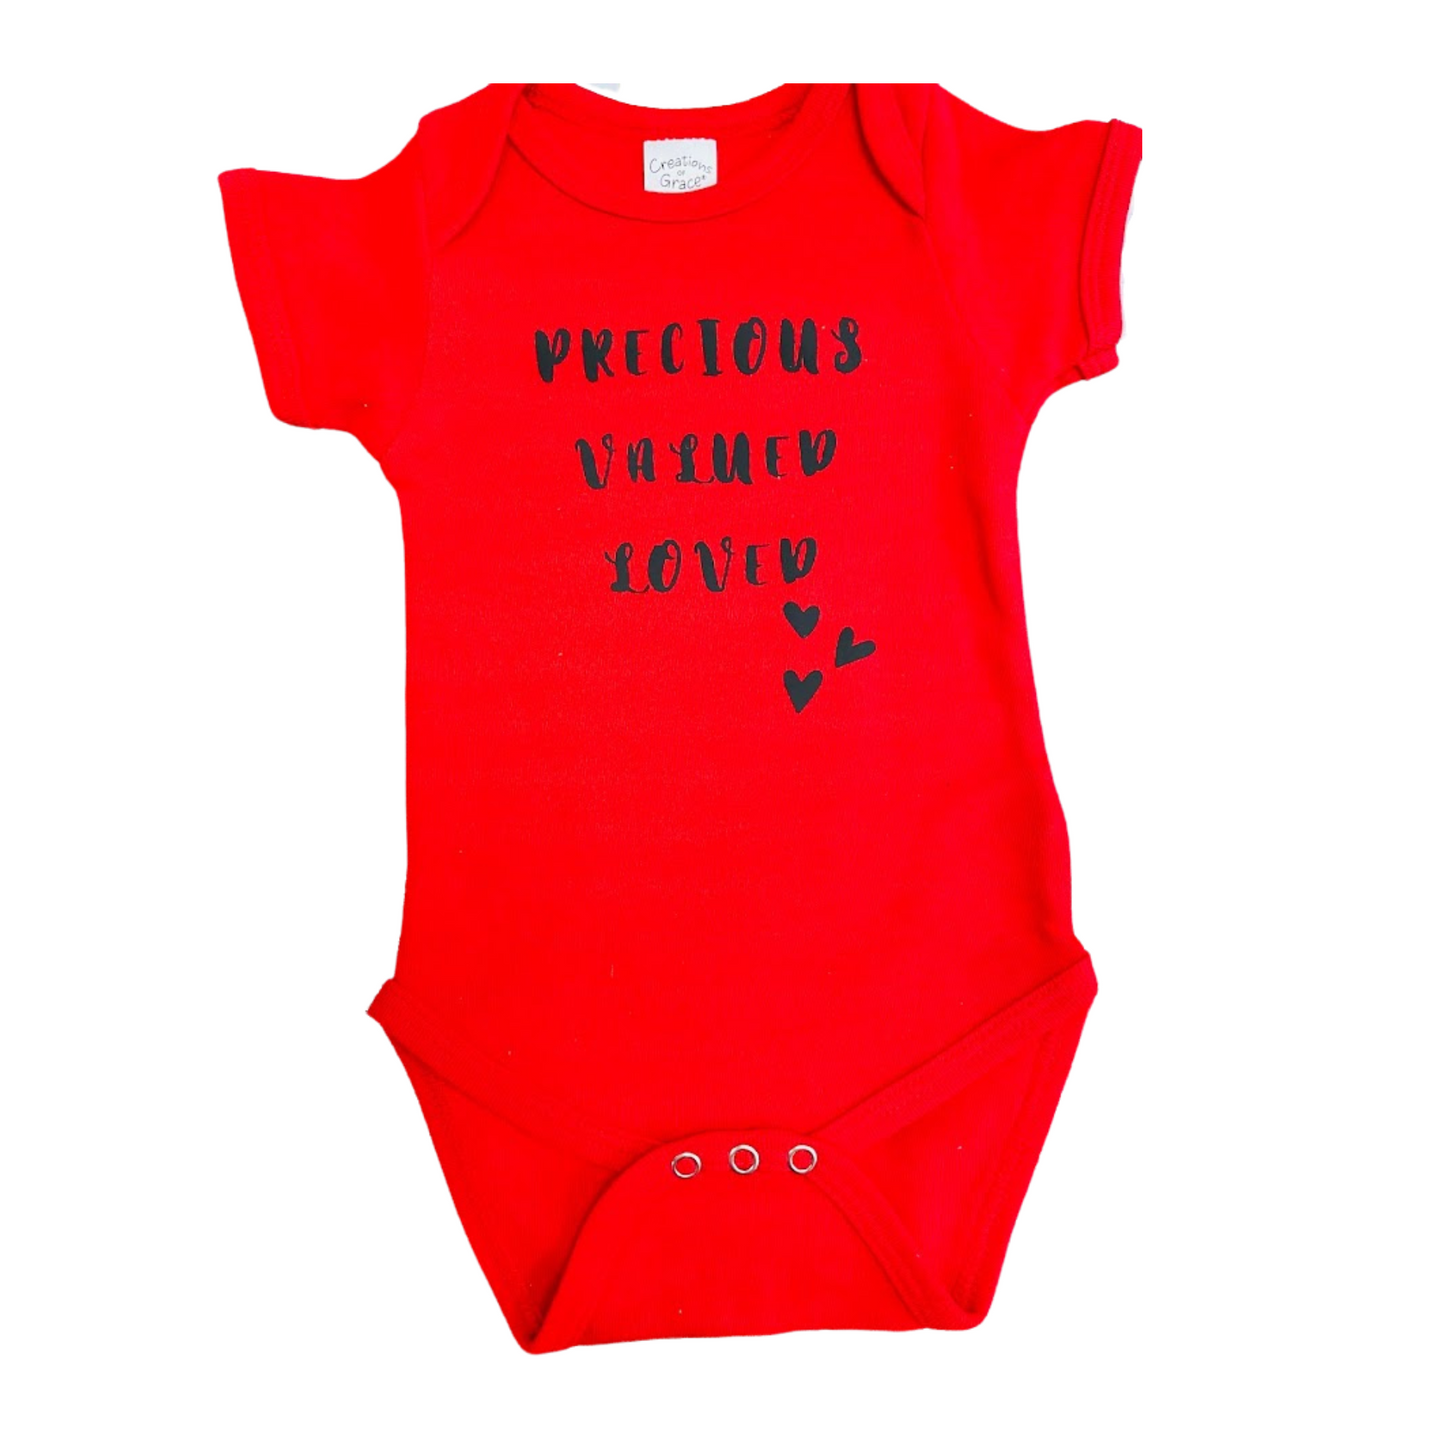 "Precious, Valued, Loved" Infant Creeper